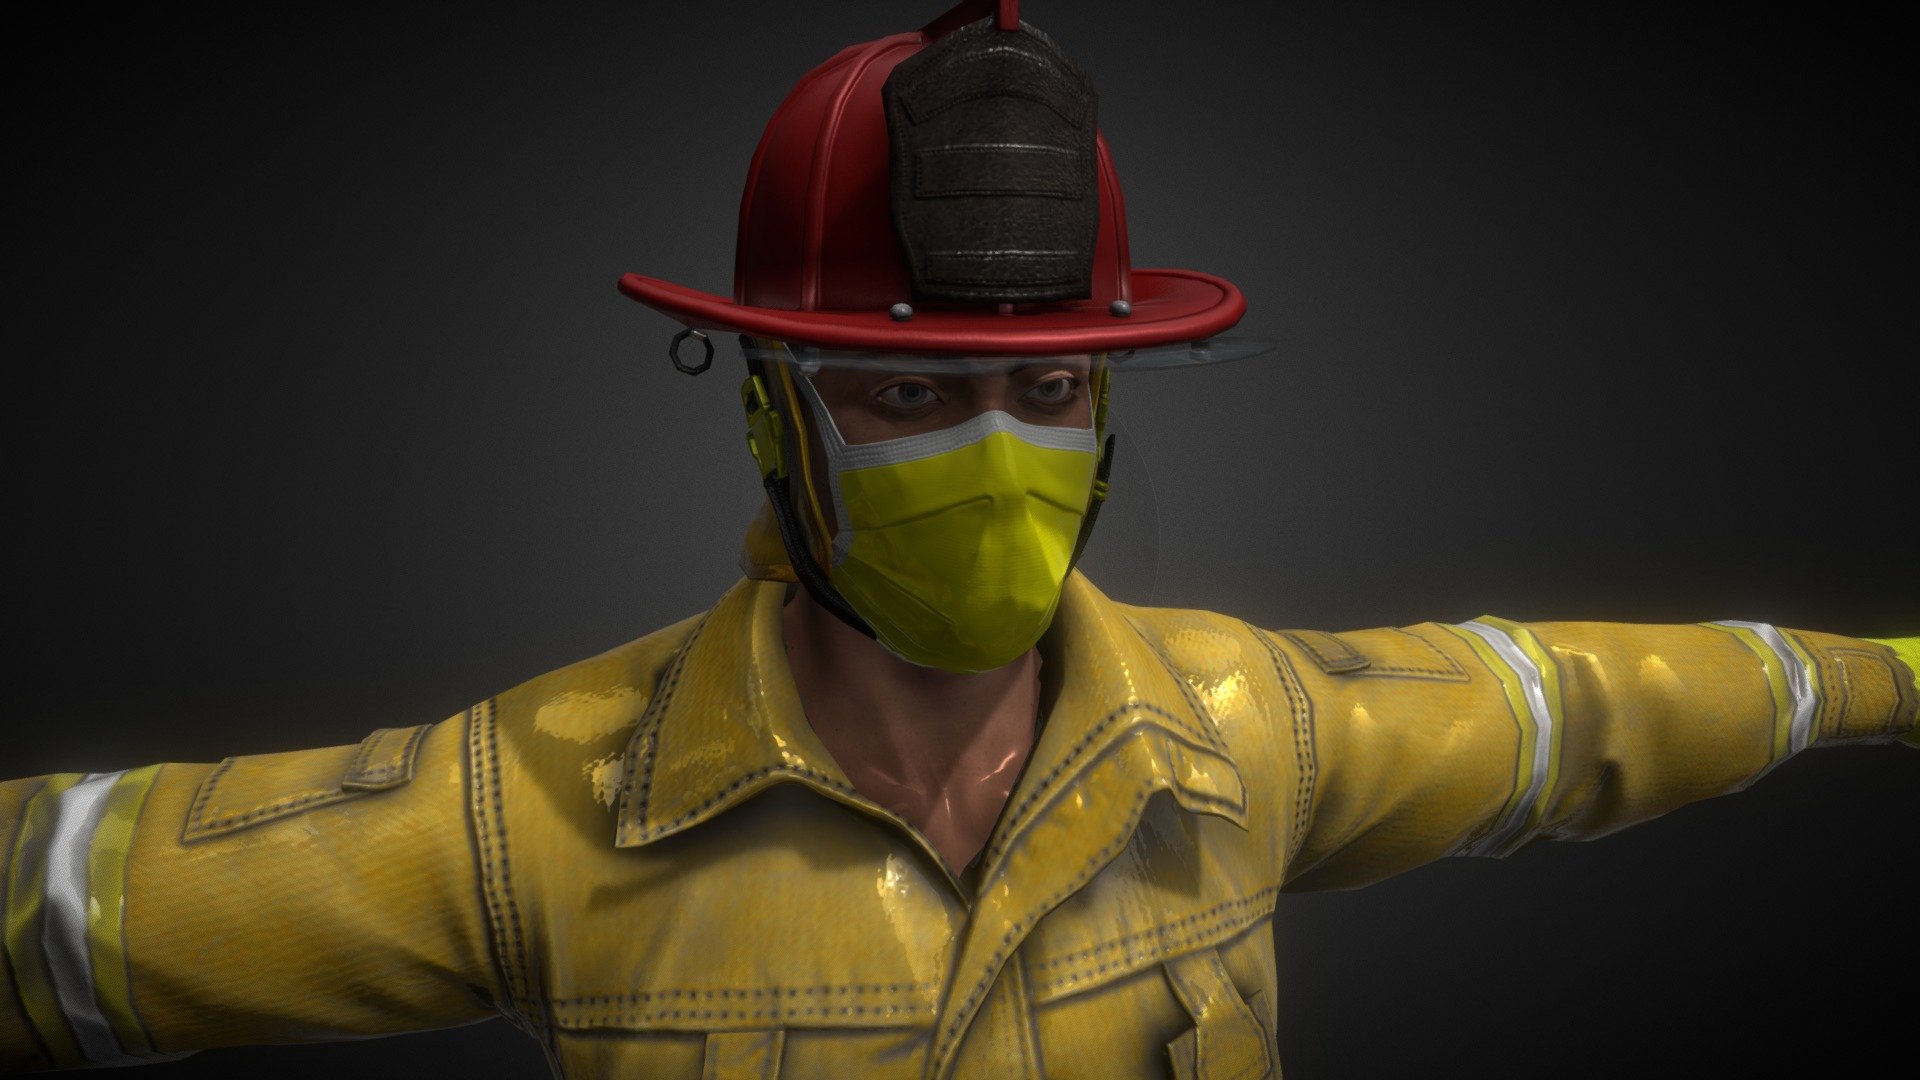 Hi!!! This is my eighth project, I hope you like it :)))))))

IMPORTANT: This mesh is only for ¨MIXAMO¨ and it is free for your games, enjoy

Textures:




Body

Top

Bottom

Shoes

Hat

Gloves

mask
 - Character (Type Fire Fighter) - Download Free 3D model by LokitoBlu (@martinezequielgorno) 3d model